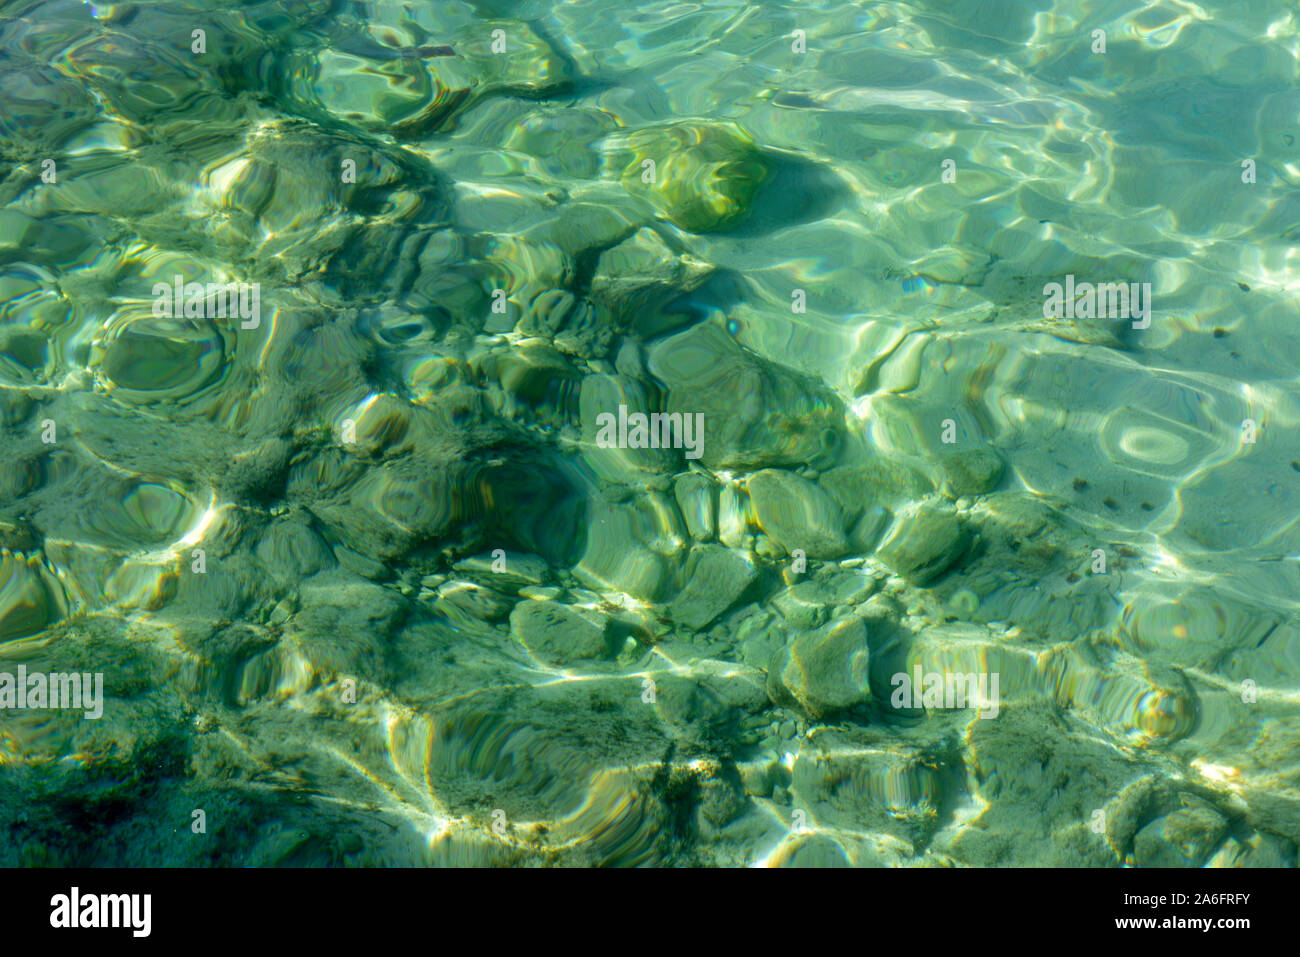 Dappled light patterns in clear green rippling sea water with distorted view of rocks on bottom Stock Photo